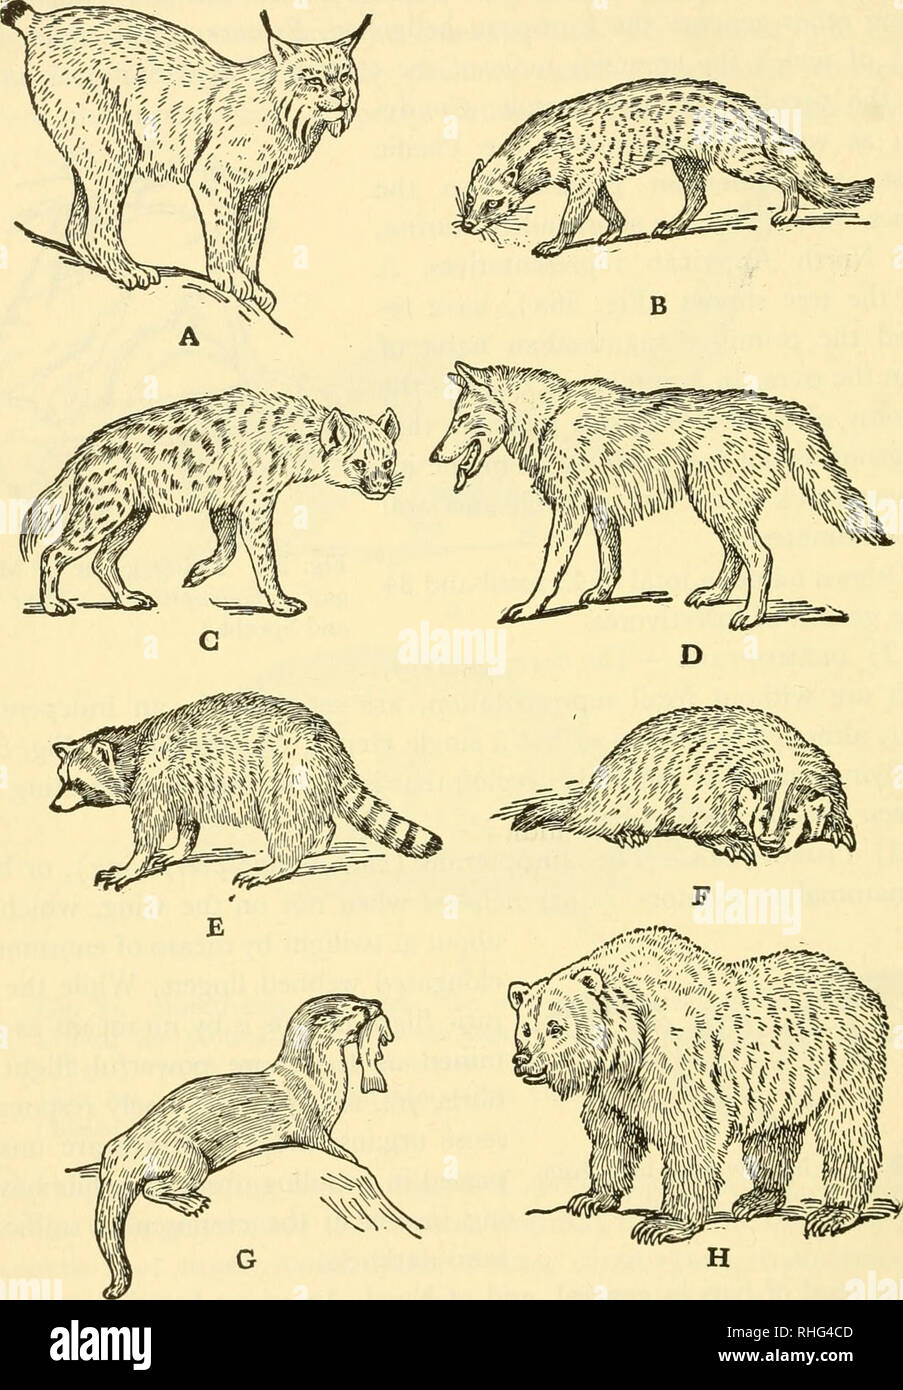 . Biology of the vertebrates : a comparative study of man and his animal allies. Vertebrates; Vertebrates -- Anatomy; Anatomy, Comparative. 64 Biology of the Vertebrates. Fie 59 Fissipede carnivores, a, Canada lynx, Felis canadensis; B, civet cat Viverra civetta; c, spotted hyaena, Crocuta rnaculata; d, gray or timber wolf, Canis nubilus; E, raccoon, Procyon lotor; f, badger, 1 ax- idea taxus; G, otter, Lutra canadensis; H, Alaska brown bear, Ursus gyas, latest of the bears. (All from Newman, The Phylum Chordata, copy- right 1939, by permission of The Macmillan Company, publishers, b and c, af Stock Photo